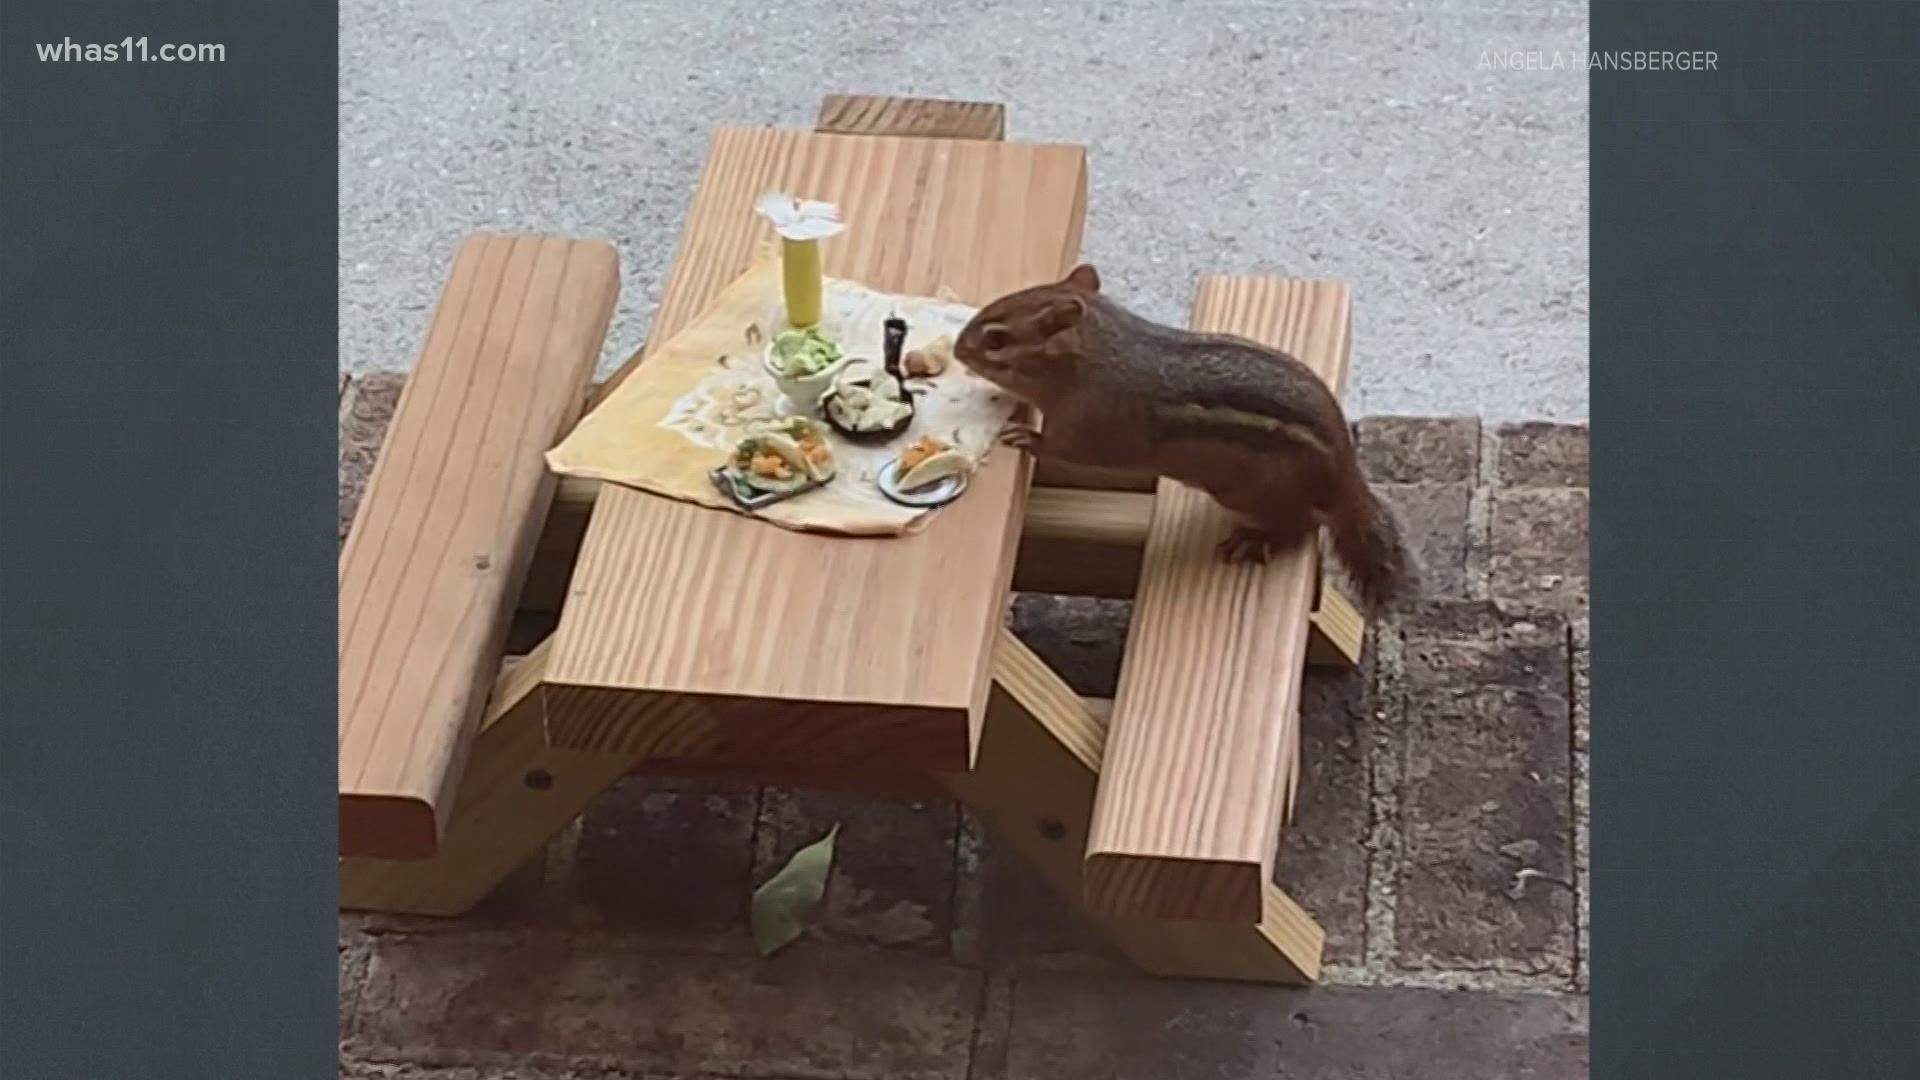 It's an image that you may have seen on social media, a chipmunk enjoying one of many gourmet meals. Angela Hansberger explains how she came up with elaborate meals.